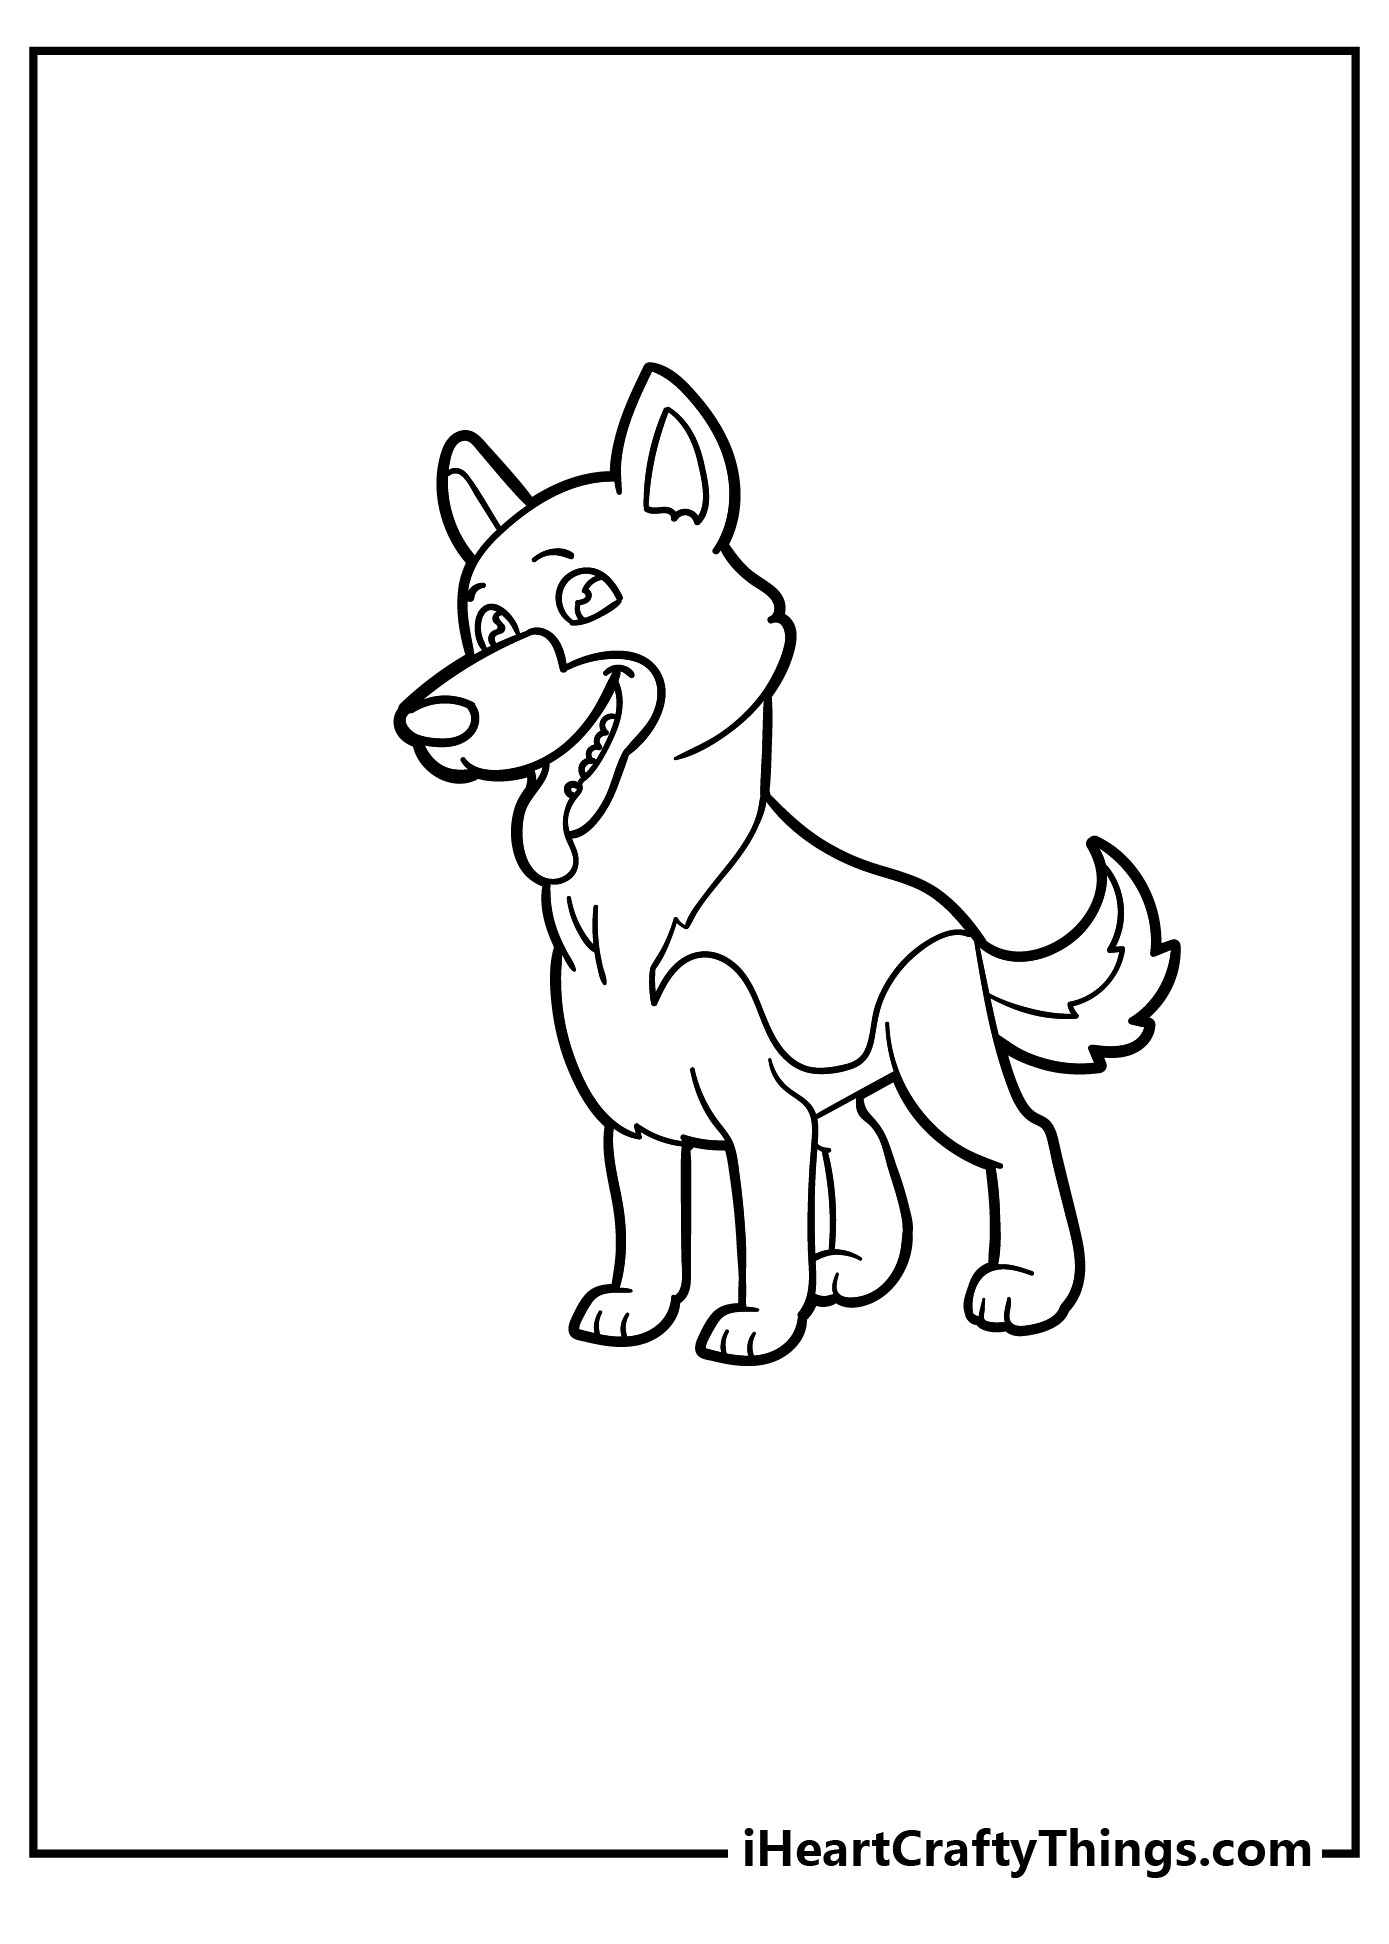 German Shepherd Coloring Pages for kids free download